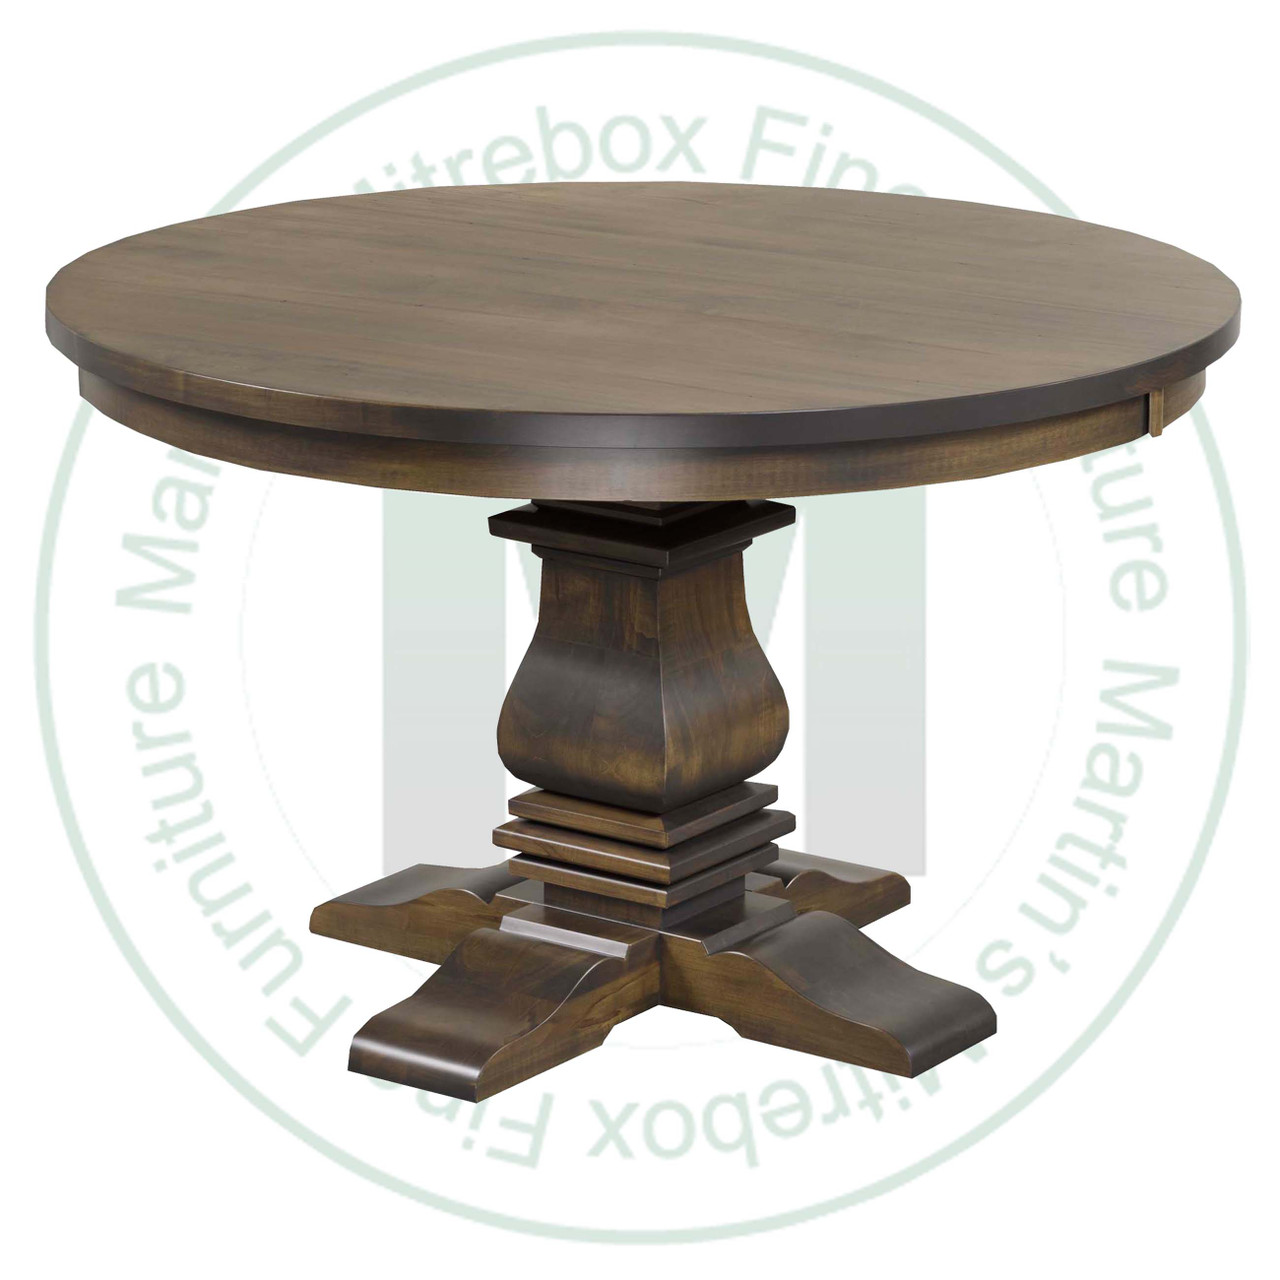 Maple Spartan Collection Single Pedestal Table 42''D x 42''W x 30''H. Table Has 1.25'' Thick Top